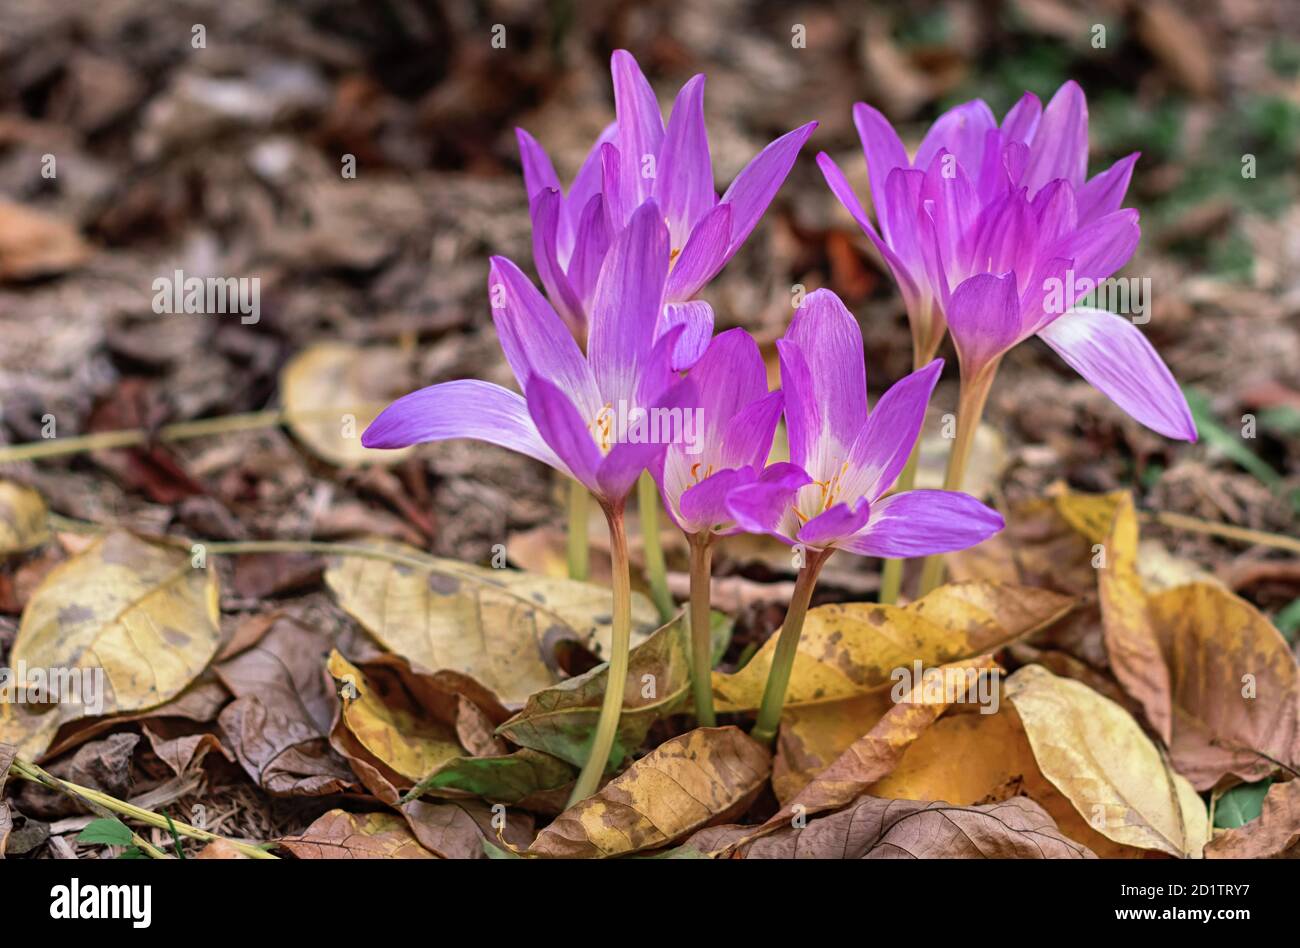 Colchicum purple grows in the garden. Blooming purple colchicum on a background of fallen autumn leaves. Close up. Stock Photo